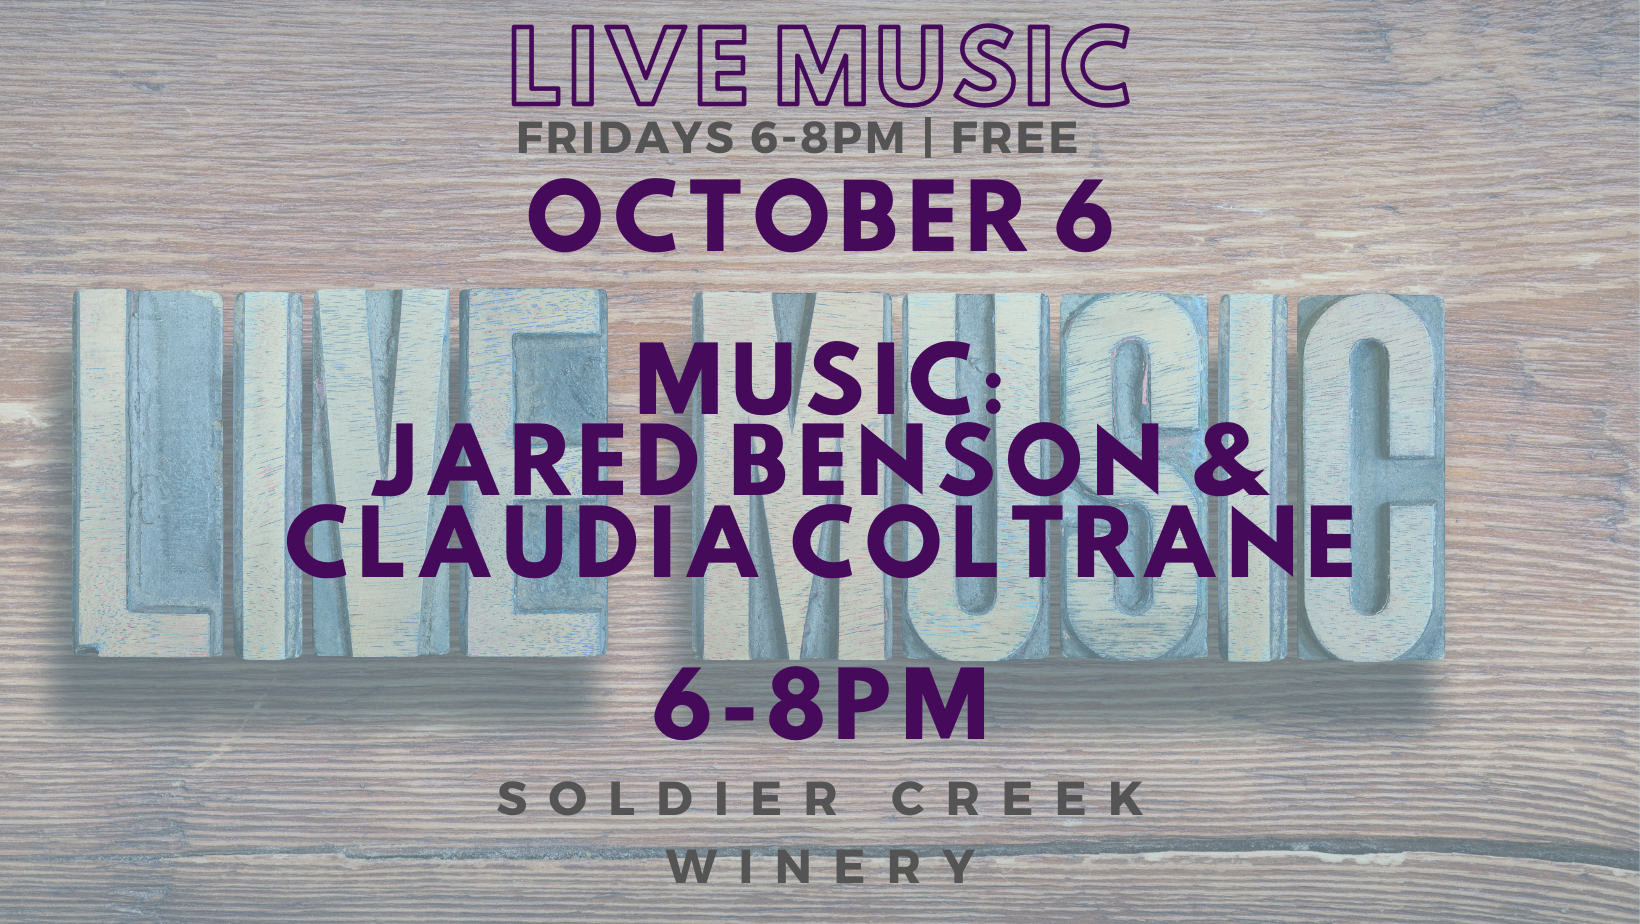 vineyard vibrations, every friday at soldier creek winery from 6 to 8pm. october 6 is jared benson and claudia coltrane. free to listen!